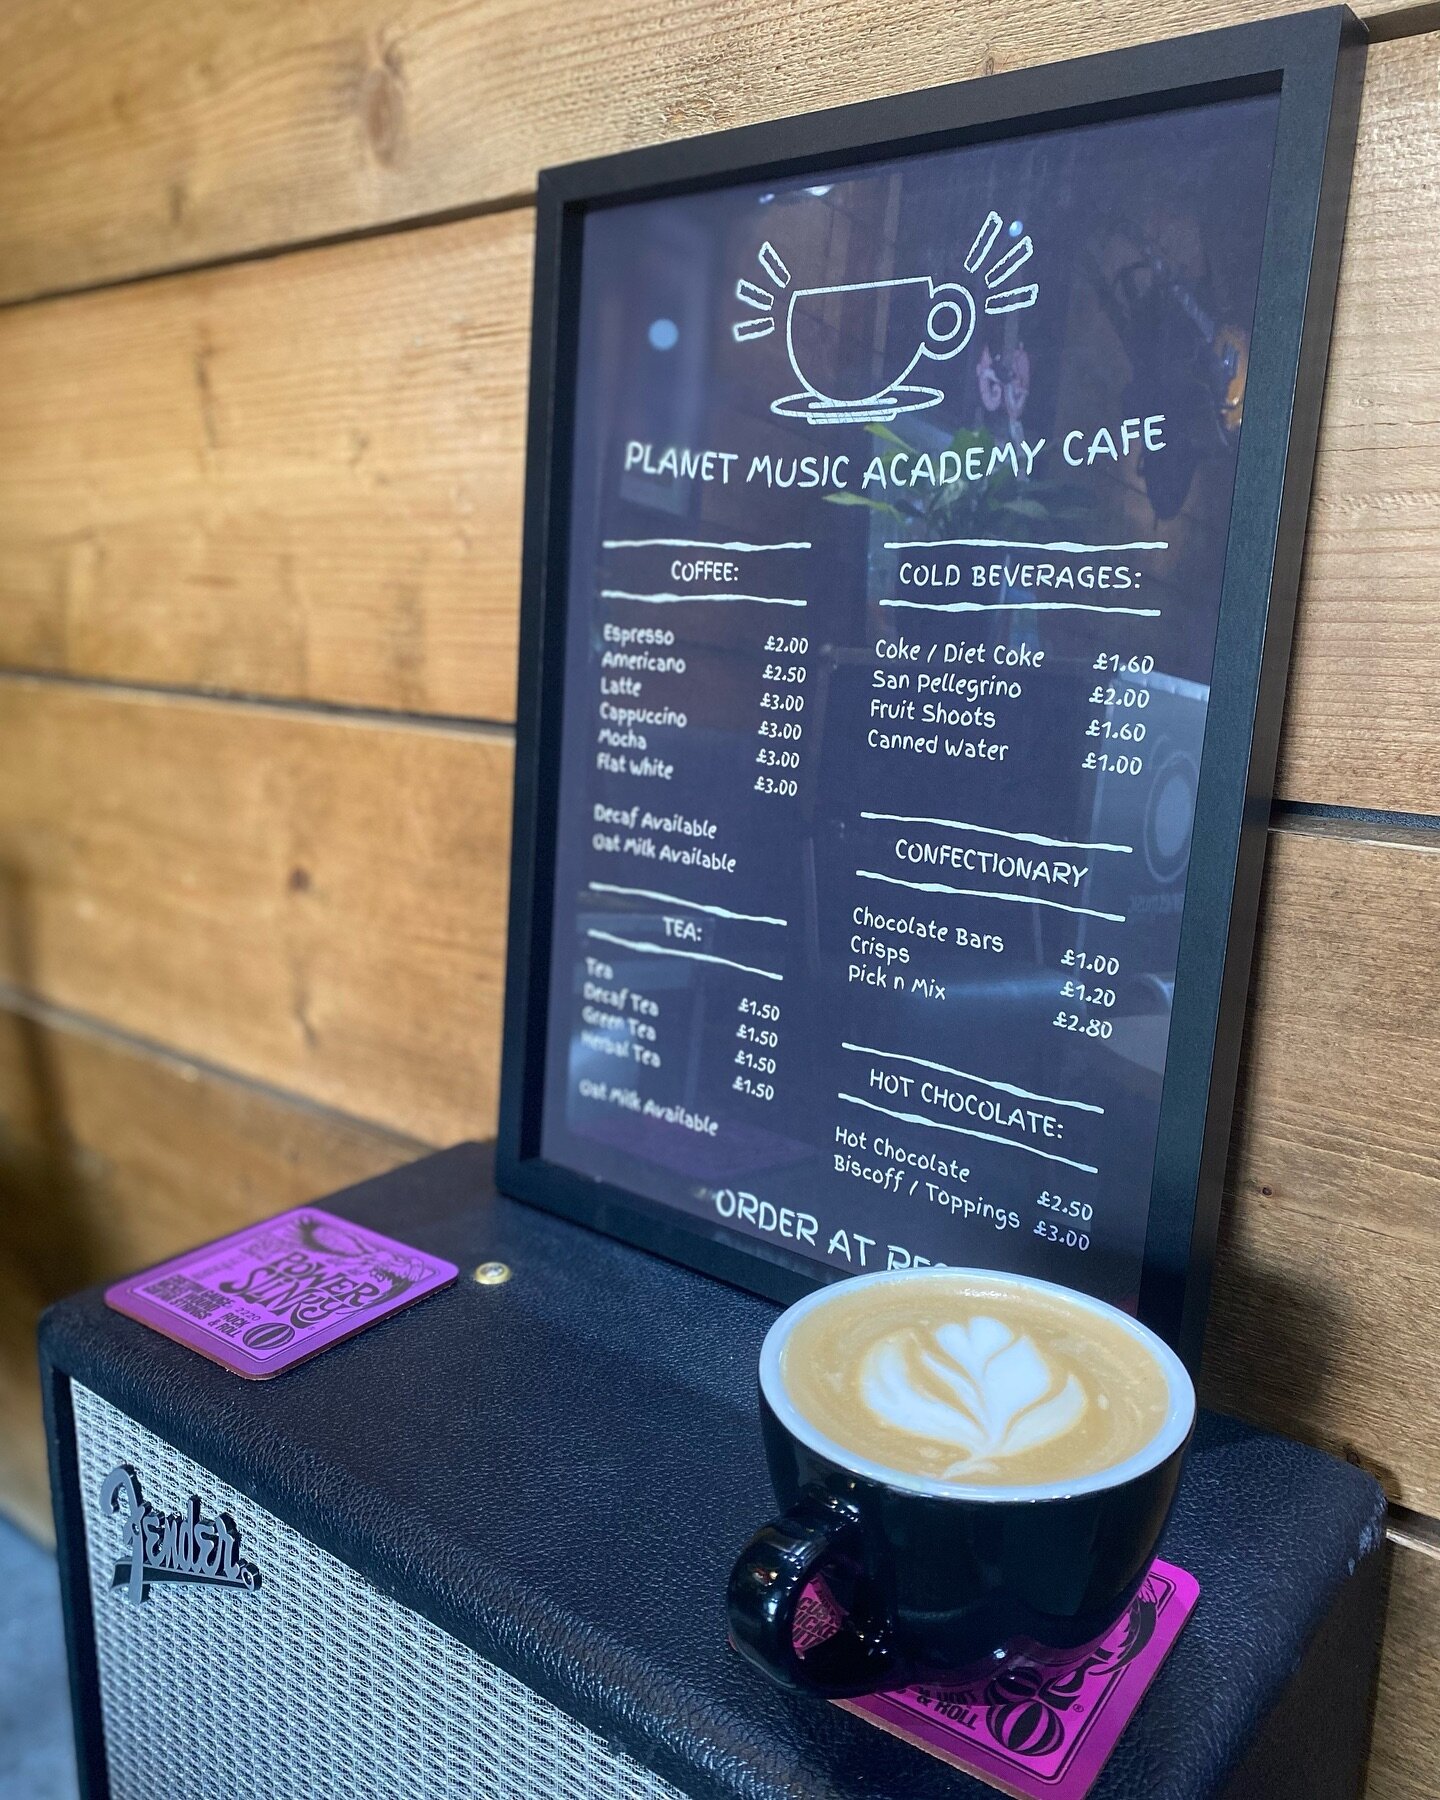 Grab a hot/soft drink or snack from the PMA hatch! Perfect to warm you up during the colder months ❄️

Enjoy it in our cosy heated waiting areas ☕️